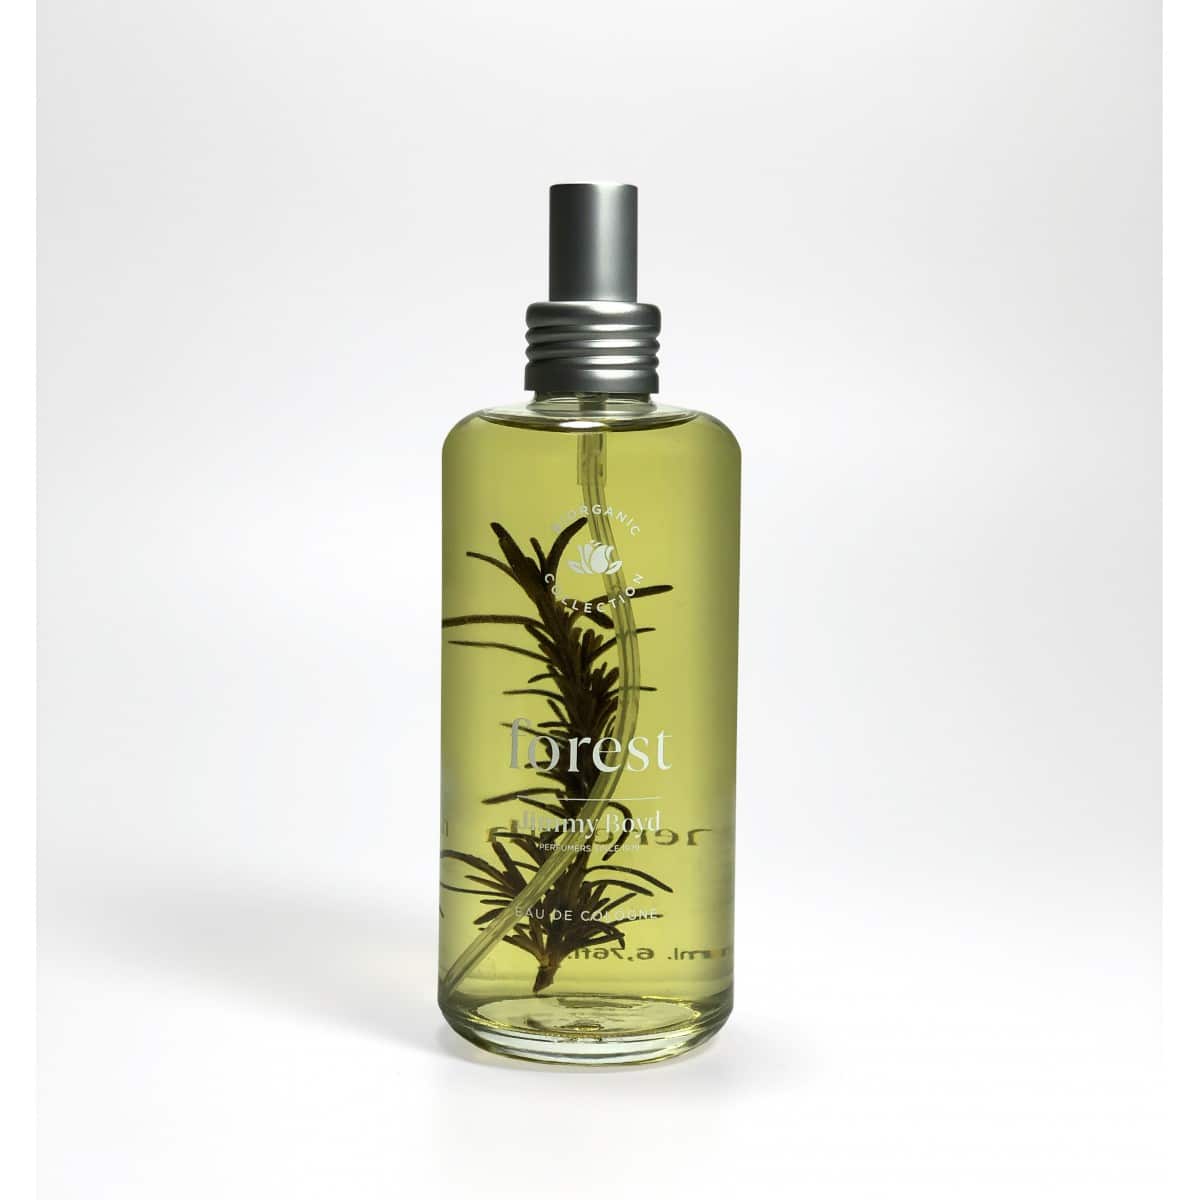 Image of Jimmy Boyd - Forest - Cologne Intense 200 ml